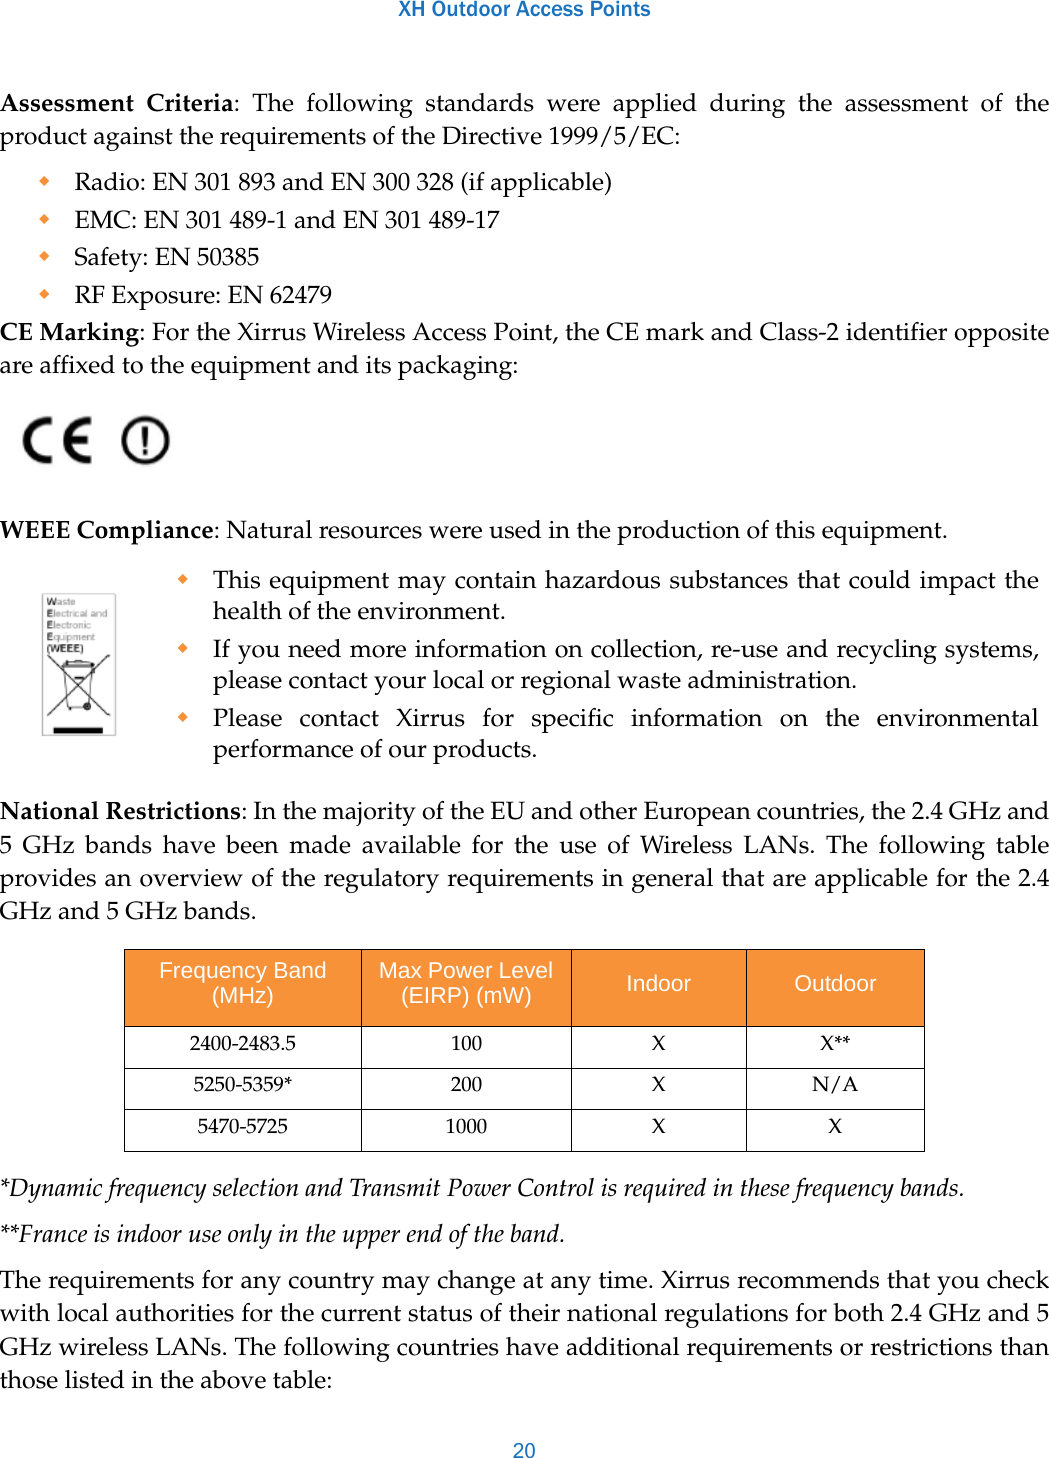 XH Outdoor Access Points20Assessment Criteria: The following standards were applied during the assessment of the product against the requirements of the Directive 1999/5/EC:Radio: EN 301 893 and EN 300 328 (if applicable)EMC: EN 301 489-1 and EN 301 489-17Safety: EN 50385 RF Exposure: EN 62479 CE Marking: For the Xirrus Wireless Access Point, the CE mark and Class-2 identifier opposite are affixed to the equipment and its packaging:WEEE Compliance: Natural resources were used in the production of this equipment.National Restrictions: In the majority of the EU and other European countries, the 2.4 GHz and 5 GHz bands have been made available for the use of Wireless LANs. The following table provides an overview of the regulatory requirements in general that are applicable for the 2.4 GHz and 5 GHz bands.*Dynamic frequency selection and Transmit Power Control is required in these frequency bands.**France is indoor use only in the upper end of the band.The requirements for any country may change at any time. Xirrus recommends that you check with local authorities for the current status of their national regulations for both 2.4 GHz and 5 GHz wireless LANs. The following countries have additional requirements or restrictions than those listed in the above table:This equipment may contain hazardous substances that could impact the health of the environment.If you need more information on collection, re-use and recycling systems, please contact your local or regional waste administration.Please contact Xirrus for specific information on the environmental performance of our products.Frequency Band (MHz) Max Power Level (EIRP) (mW) Indoor Outdoor2400-2483.5 100 X X**5250-5359* 200 X N/A5470-5725 1000 X X